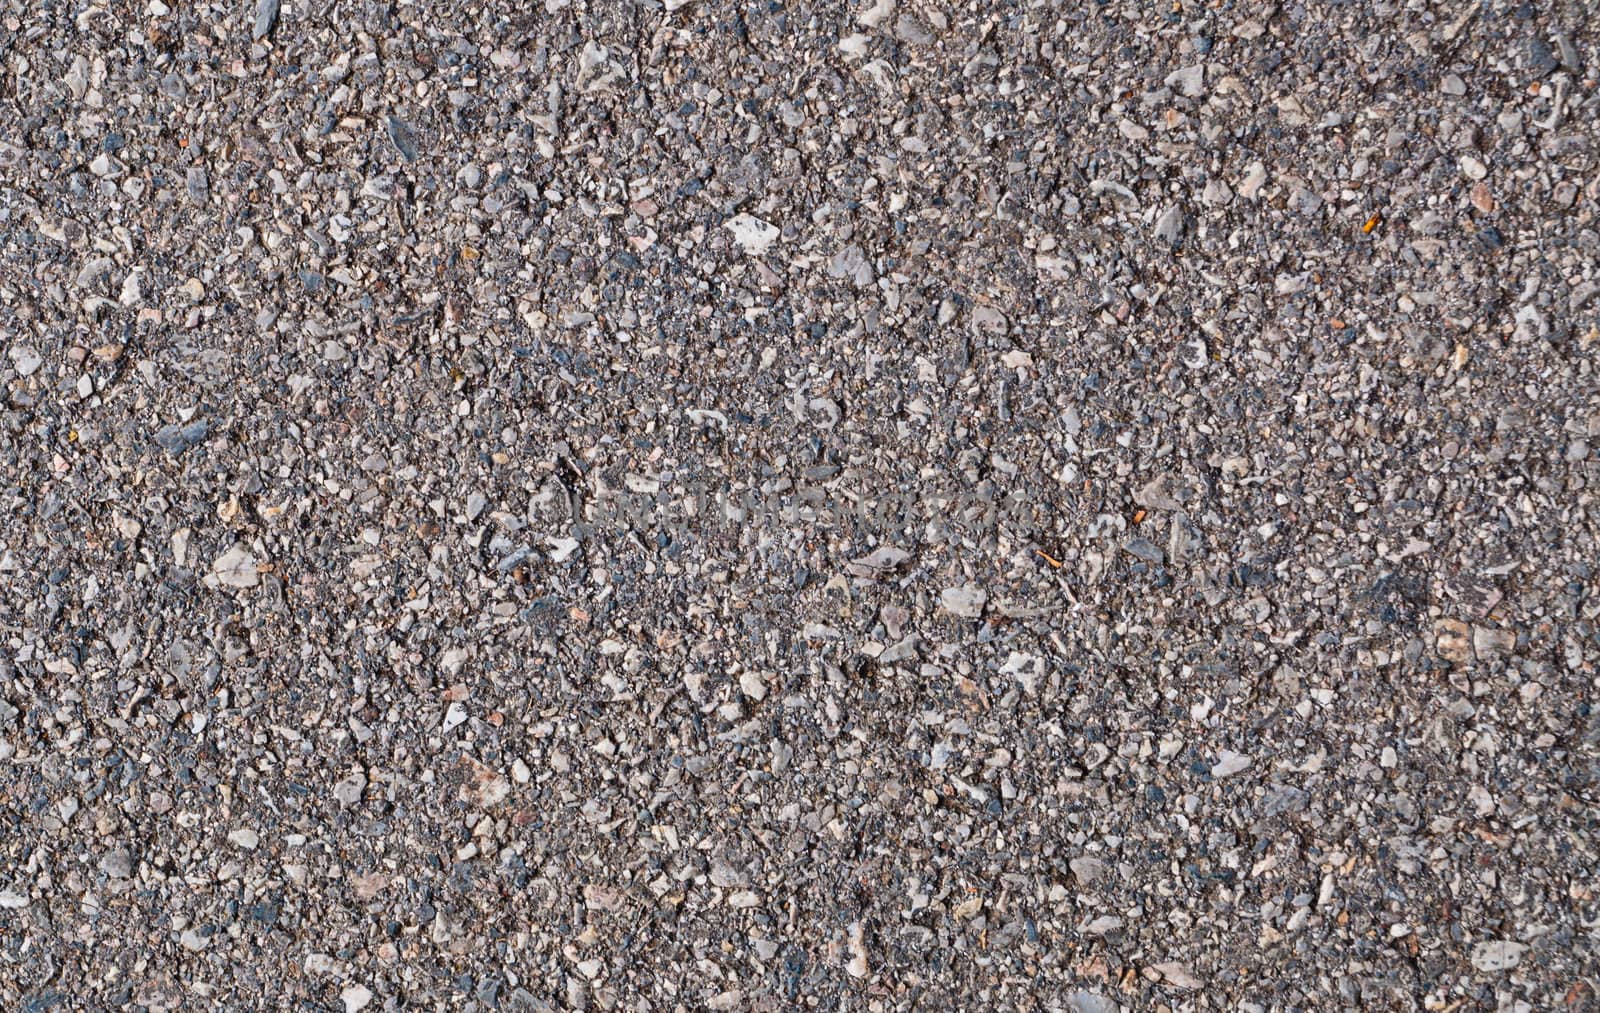 This is a Concrete ground It's have a gray colour